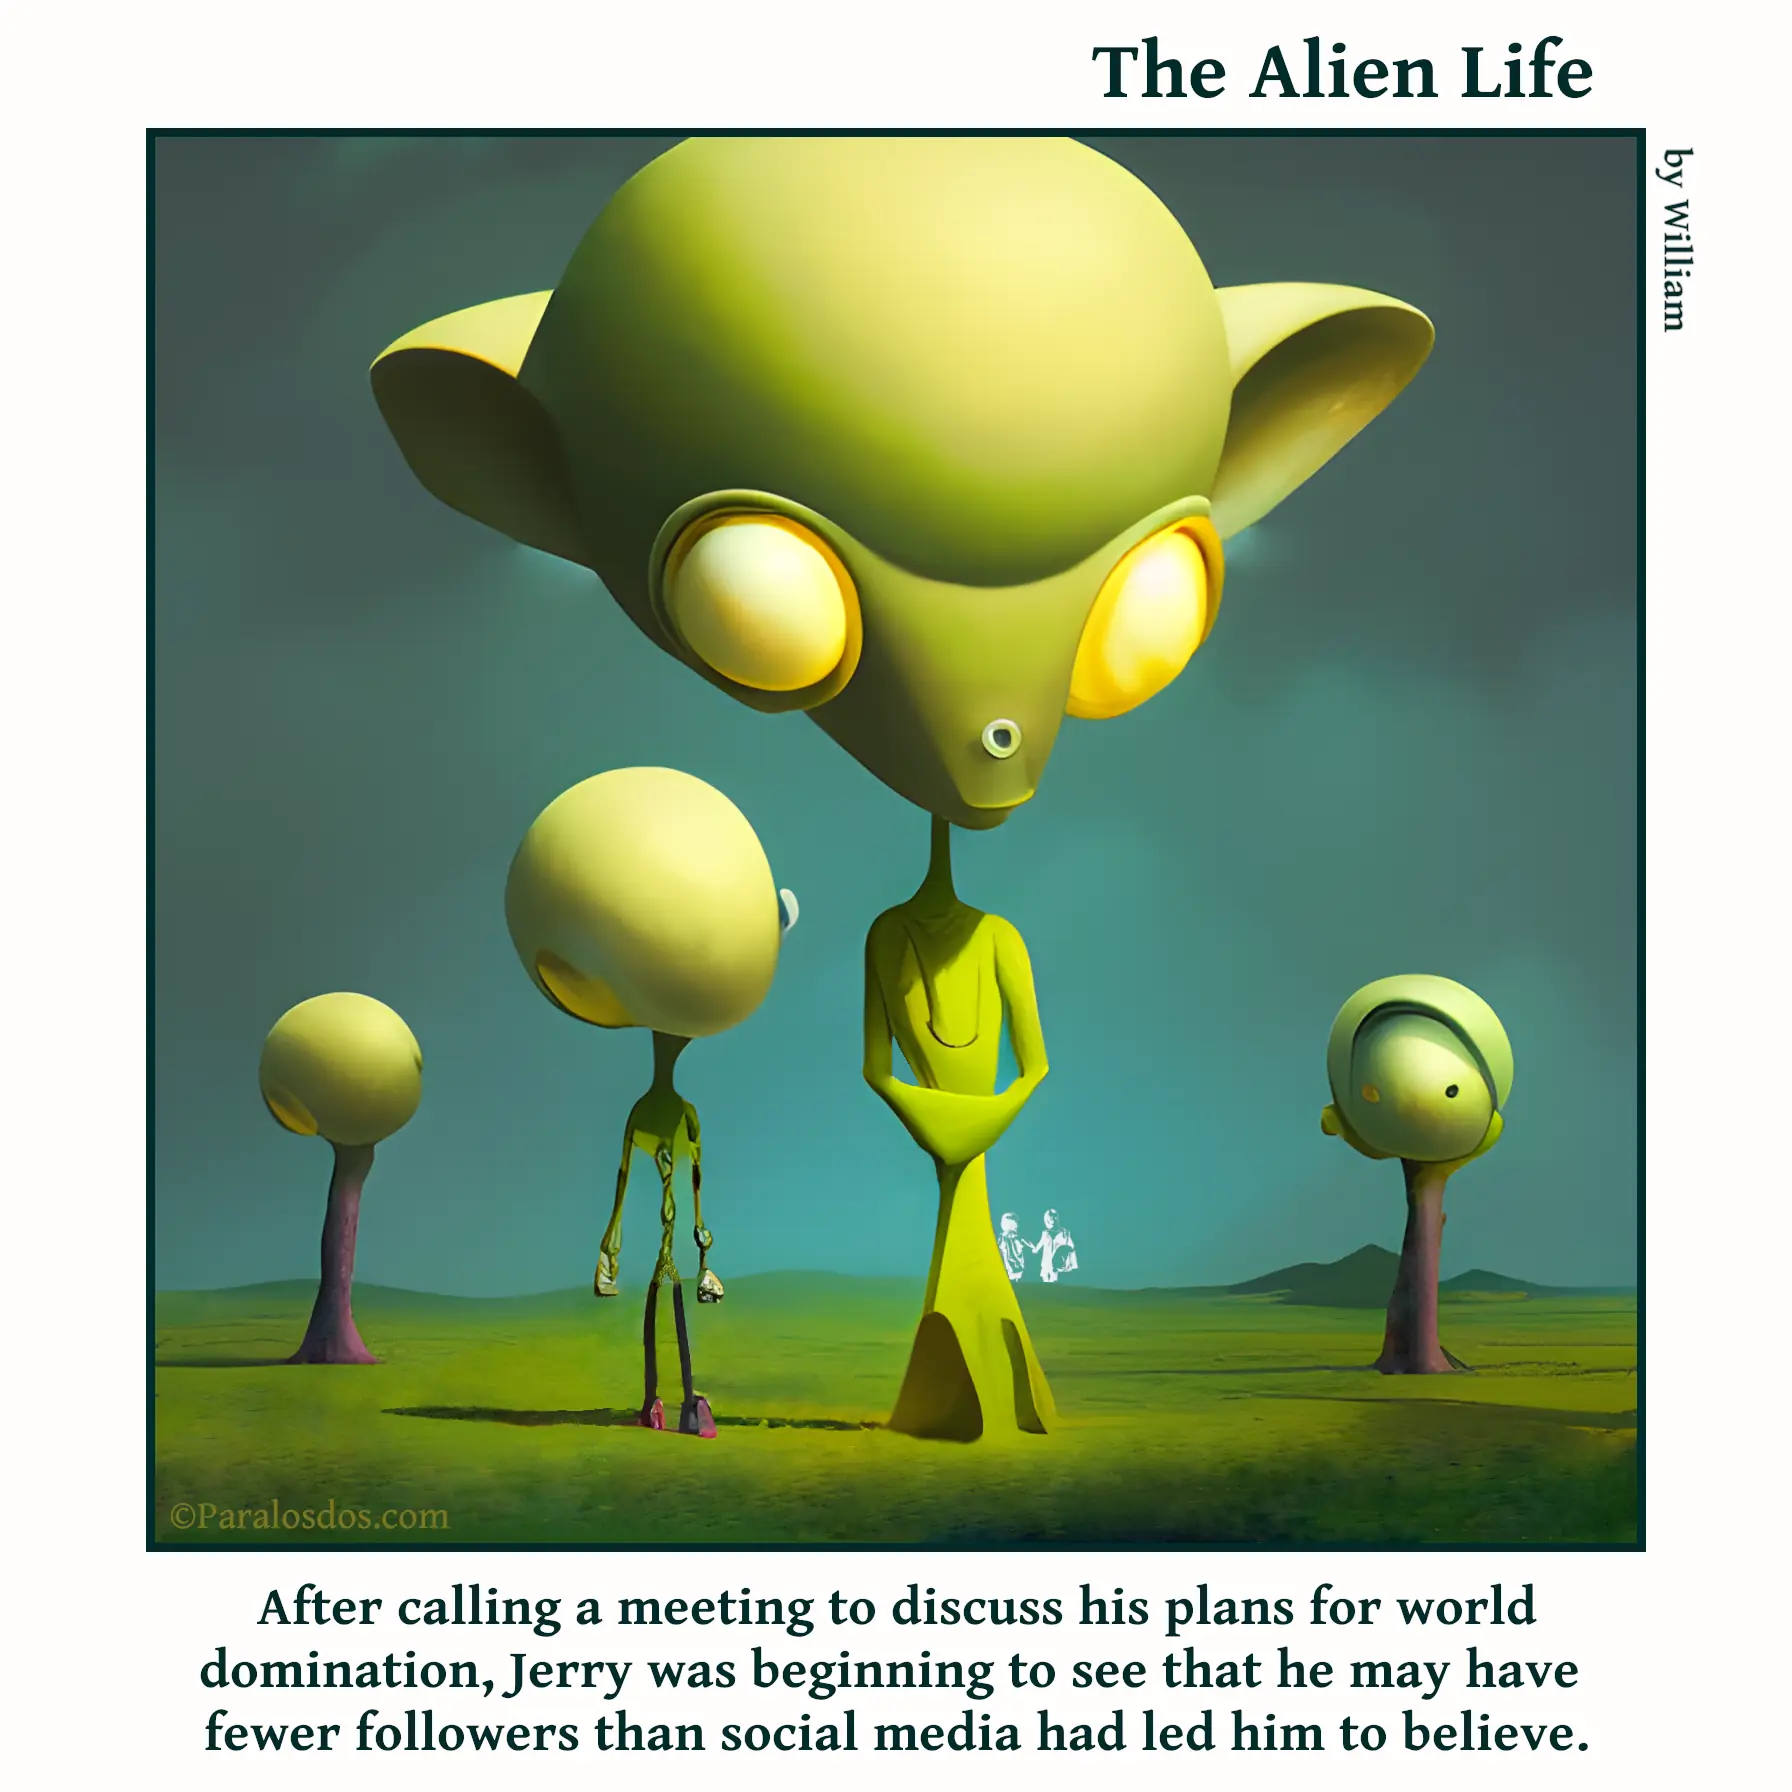 The Alien Life, one panel Comic. An evil villain looking alien is standing in front of three other aliens. The caption reads: After calling a meeting to discuss his plans for world domination, Jerry was beginning to see that he may have fewer followers than social media had led him to believe.